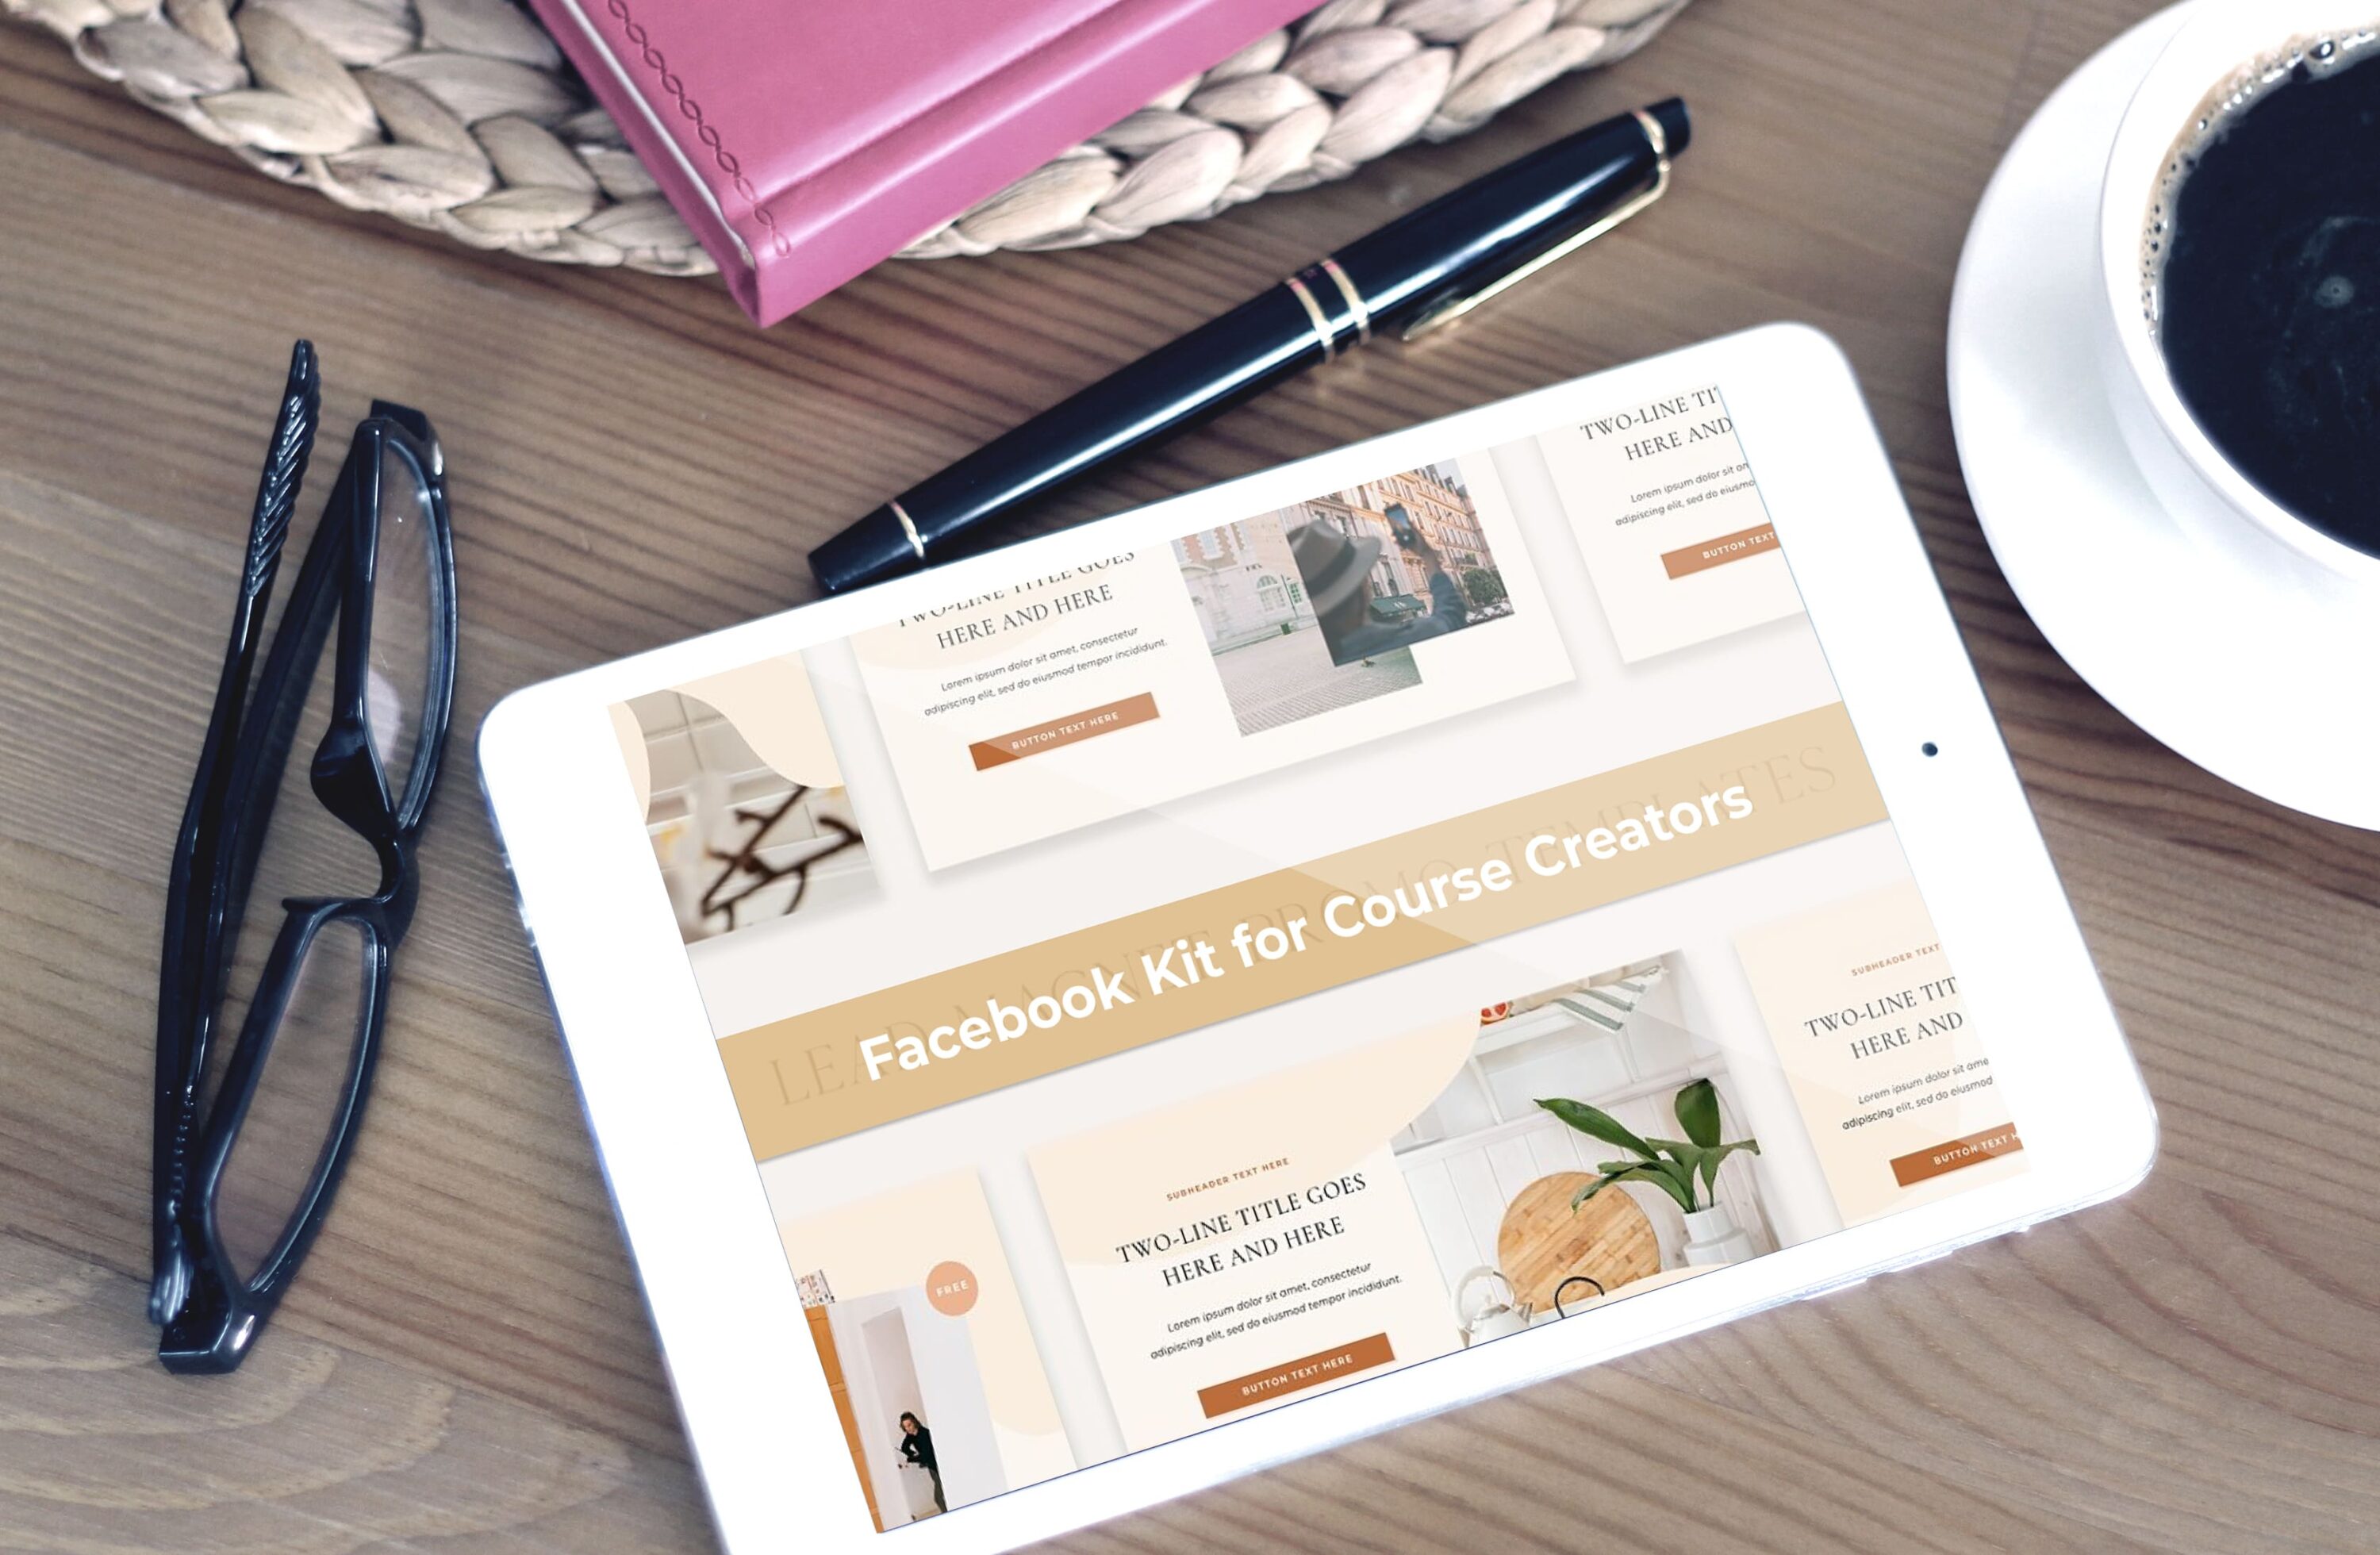 Tablet option of the Facebook Kit for Course Creators.